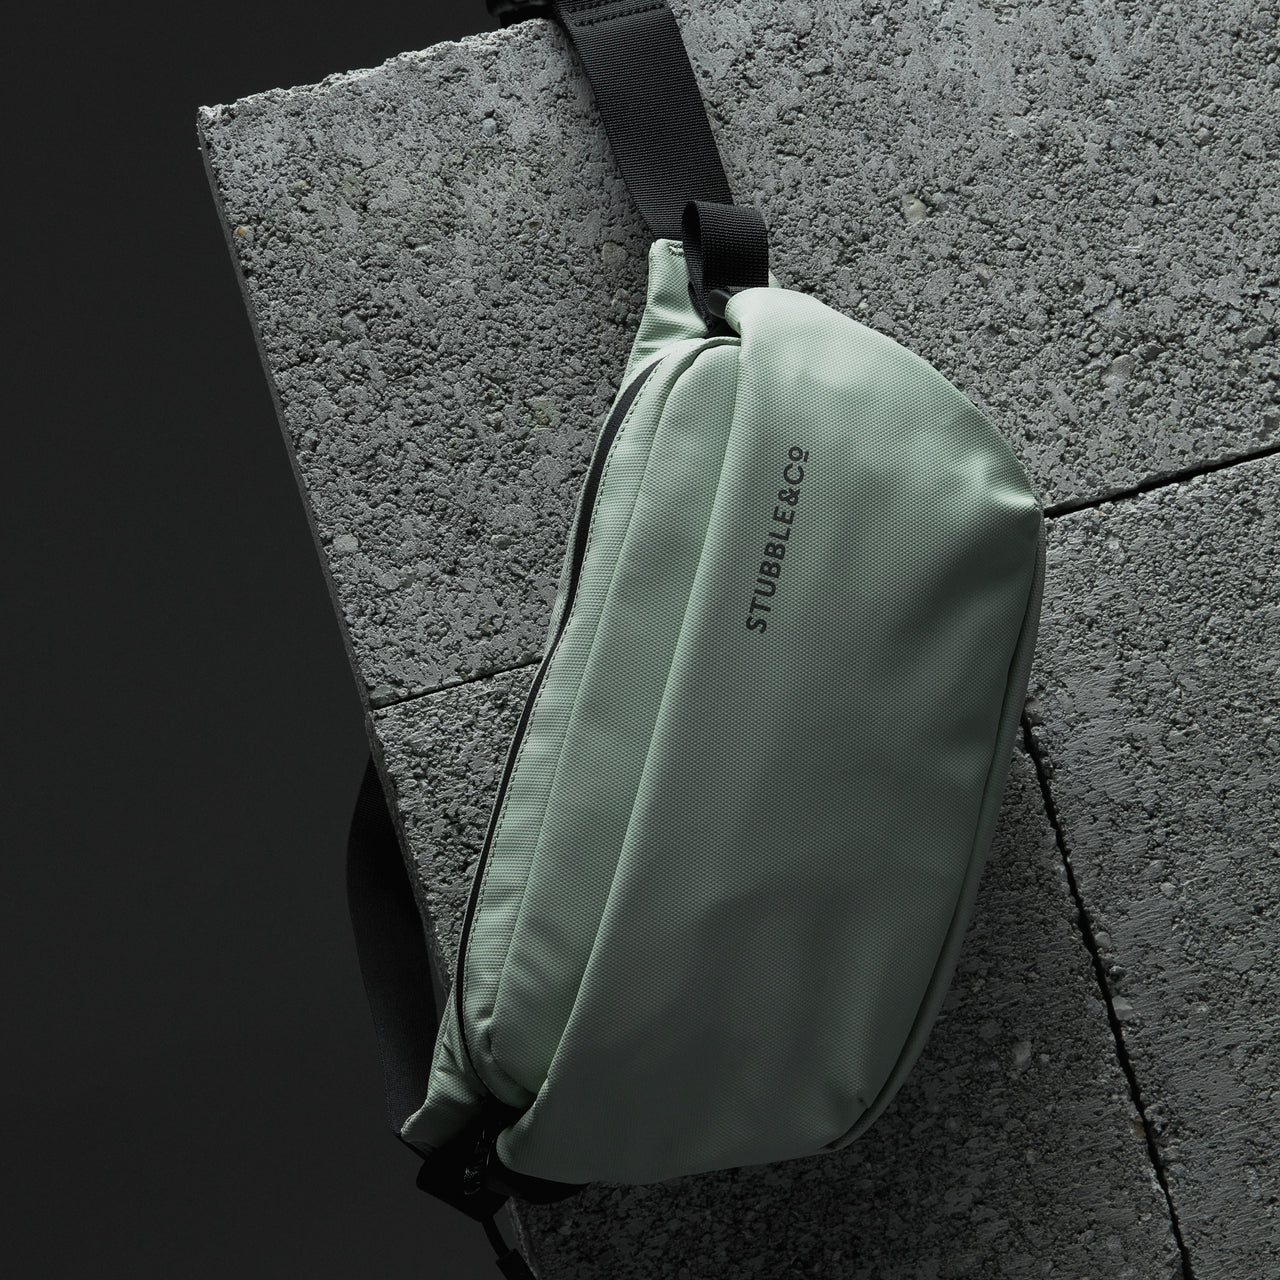 Front view of a Matcha green Crossbody bag on a concrete surface